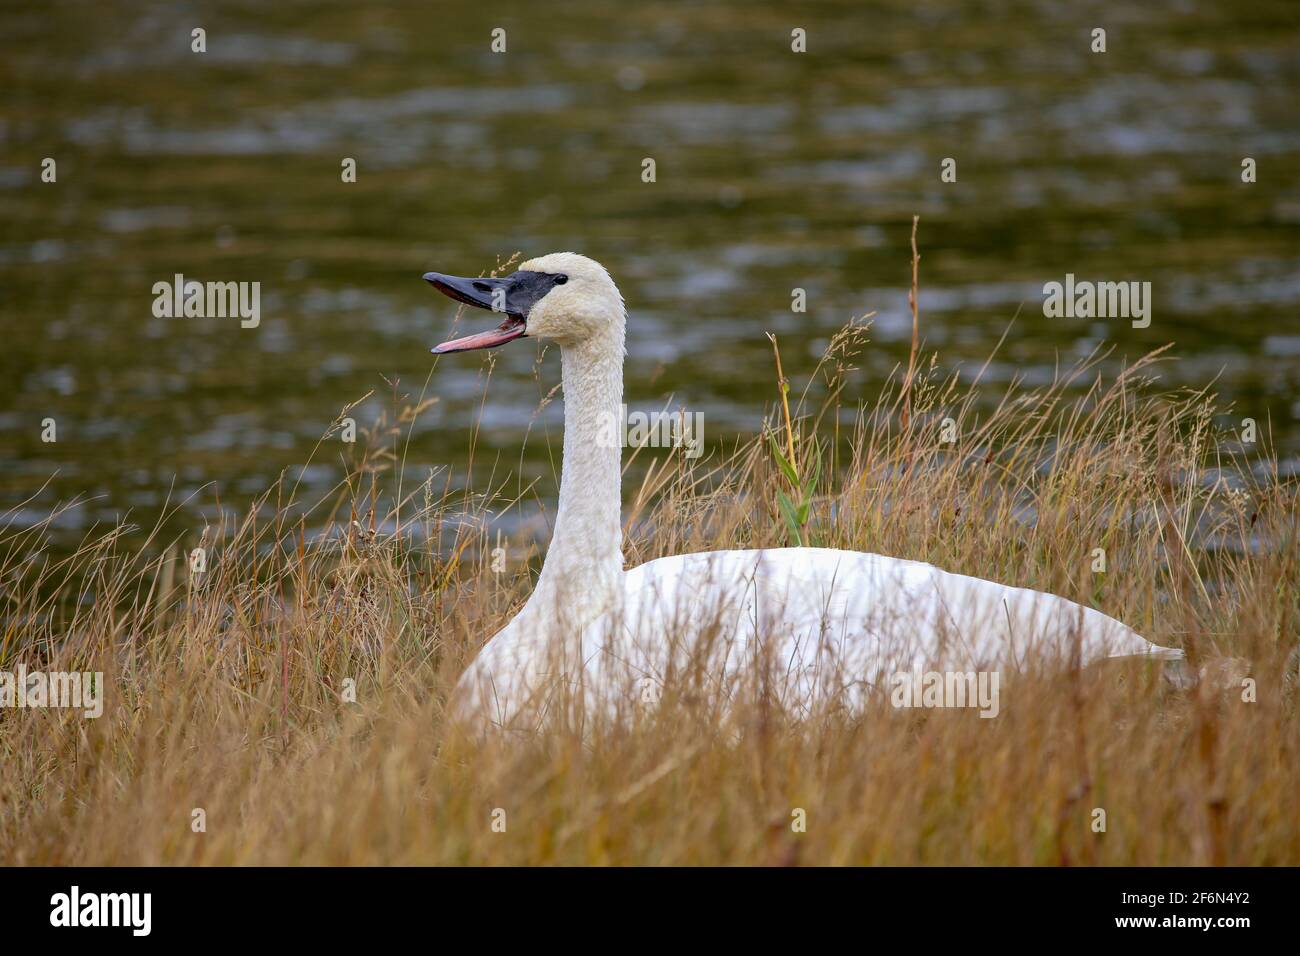 Trumpeter Swan Cygnus buccinator on the banks of the Firehole River in Yellowstone National Park, Wyoming Stock Photo